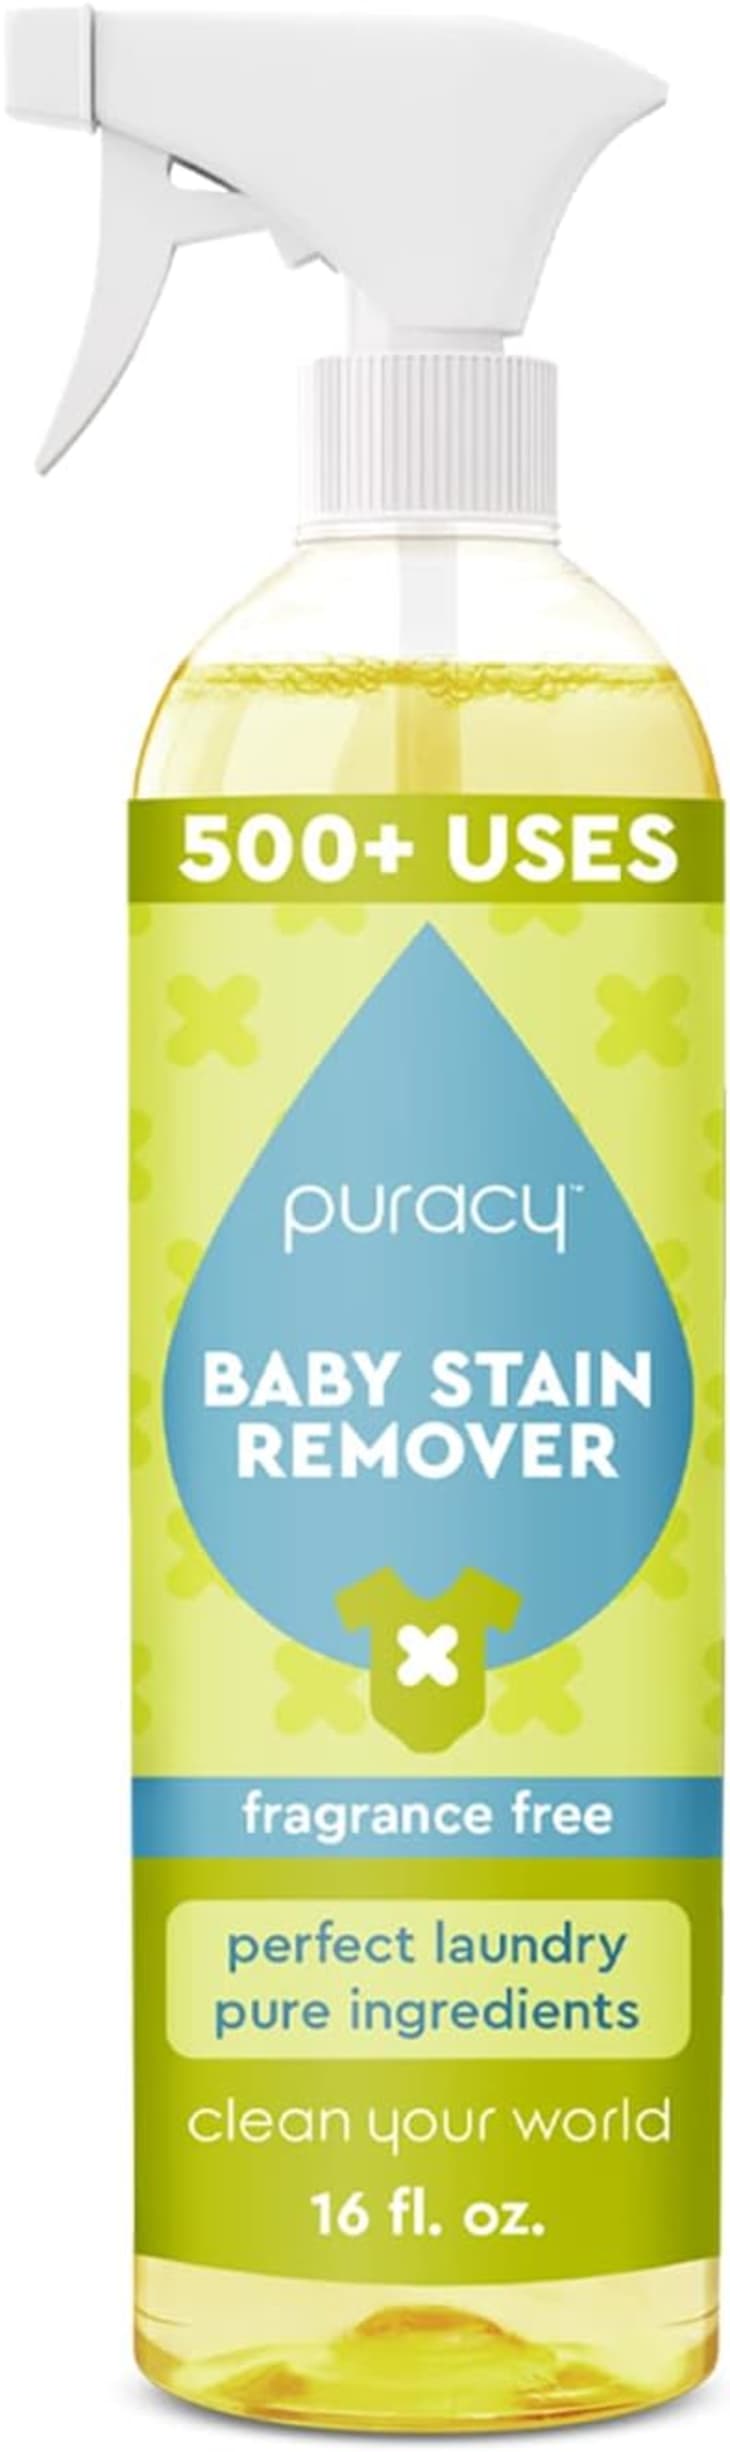 Puracy Natural Baby Laundry Stain Remover at Amazon